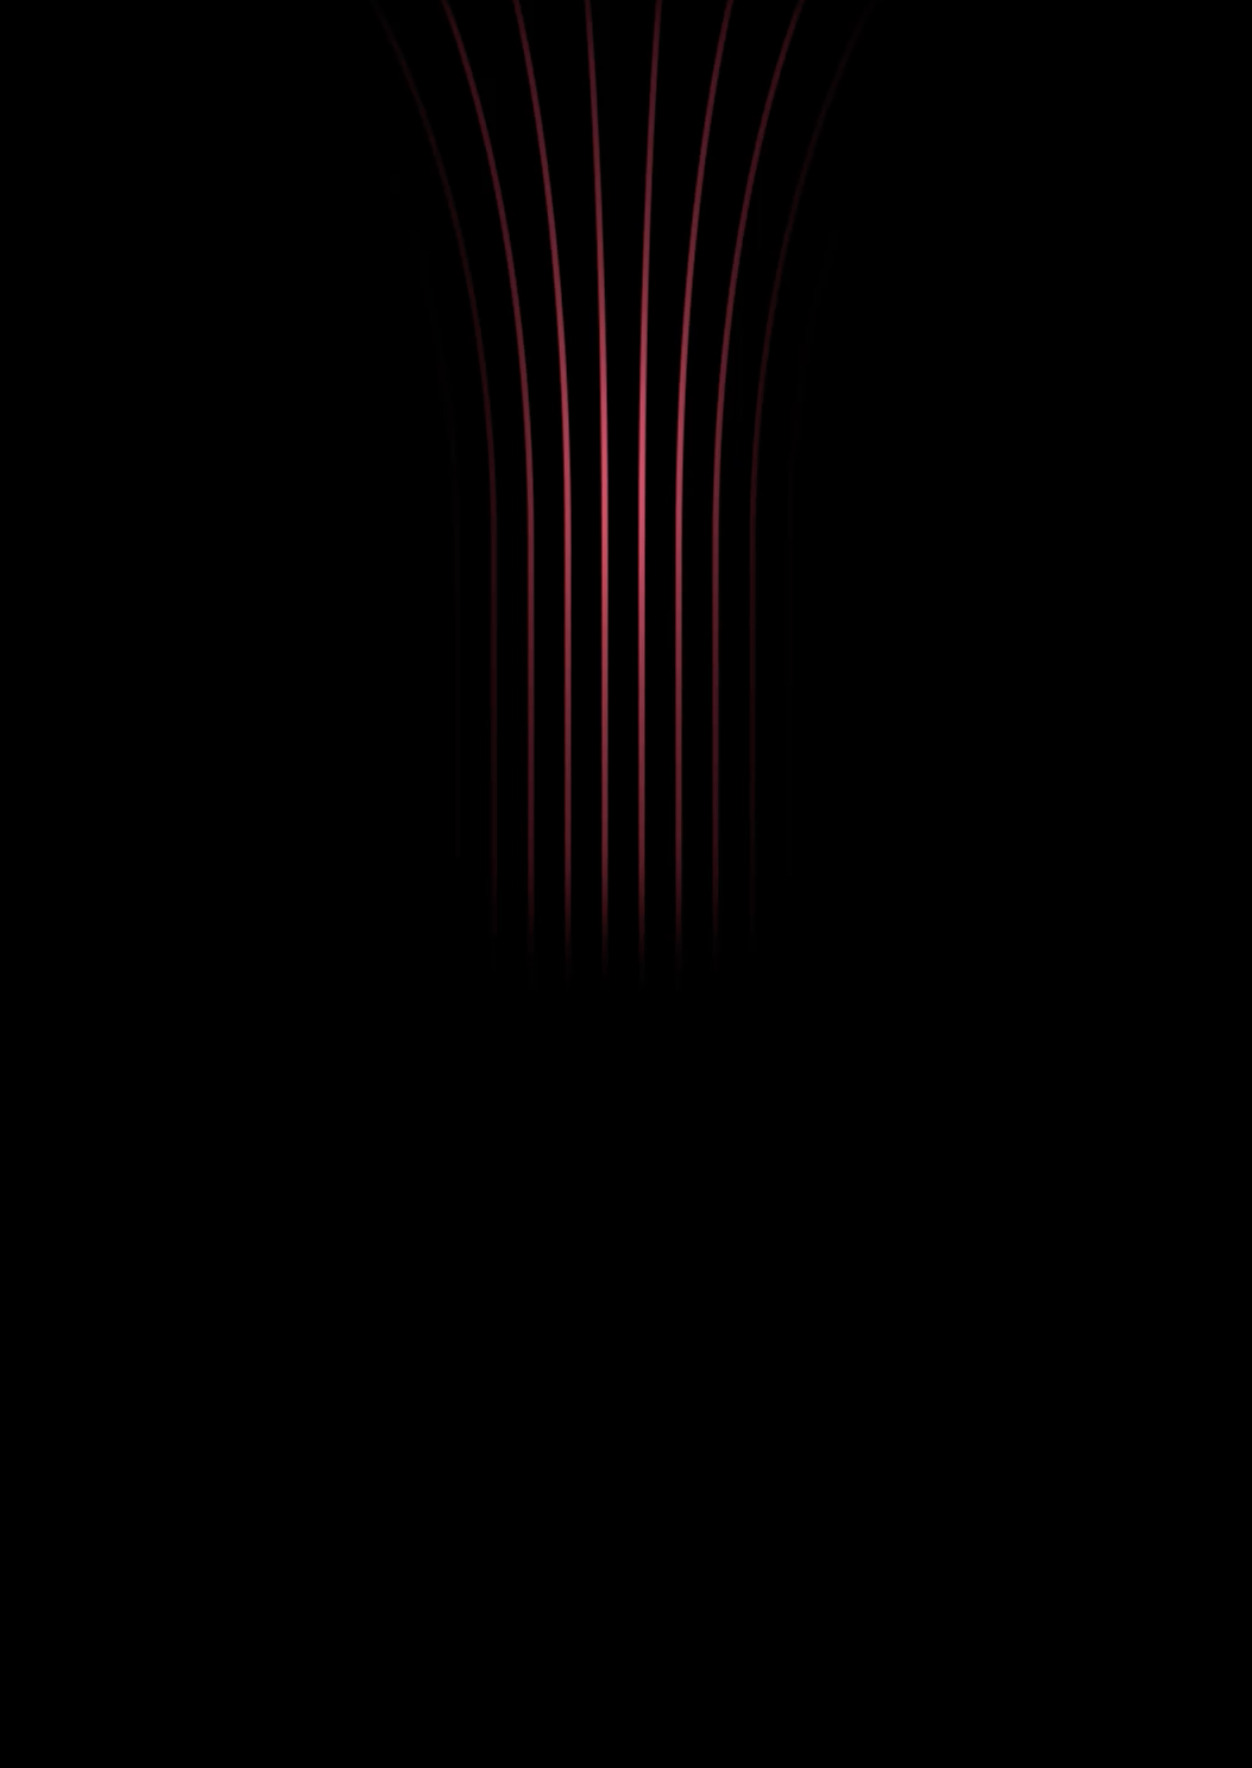 Pink graphic lines on a black background